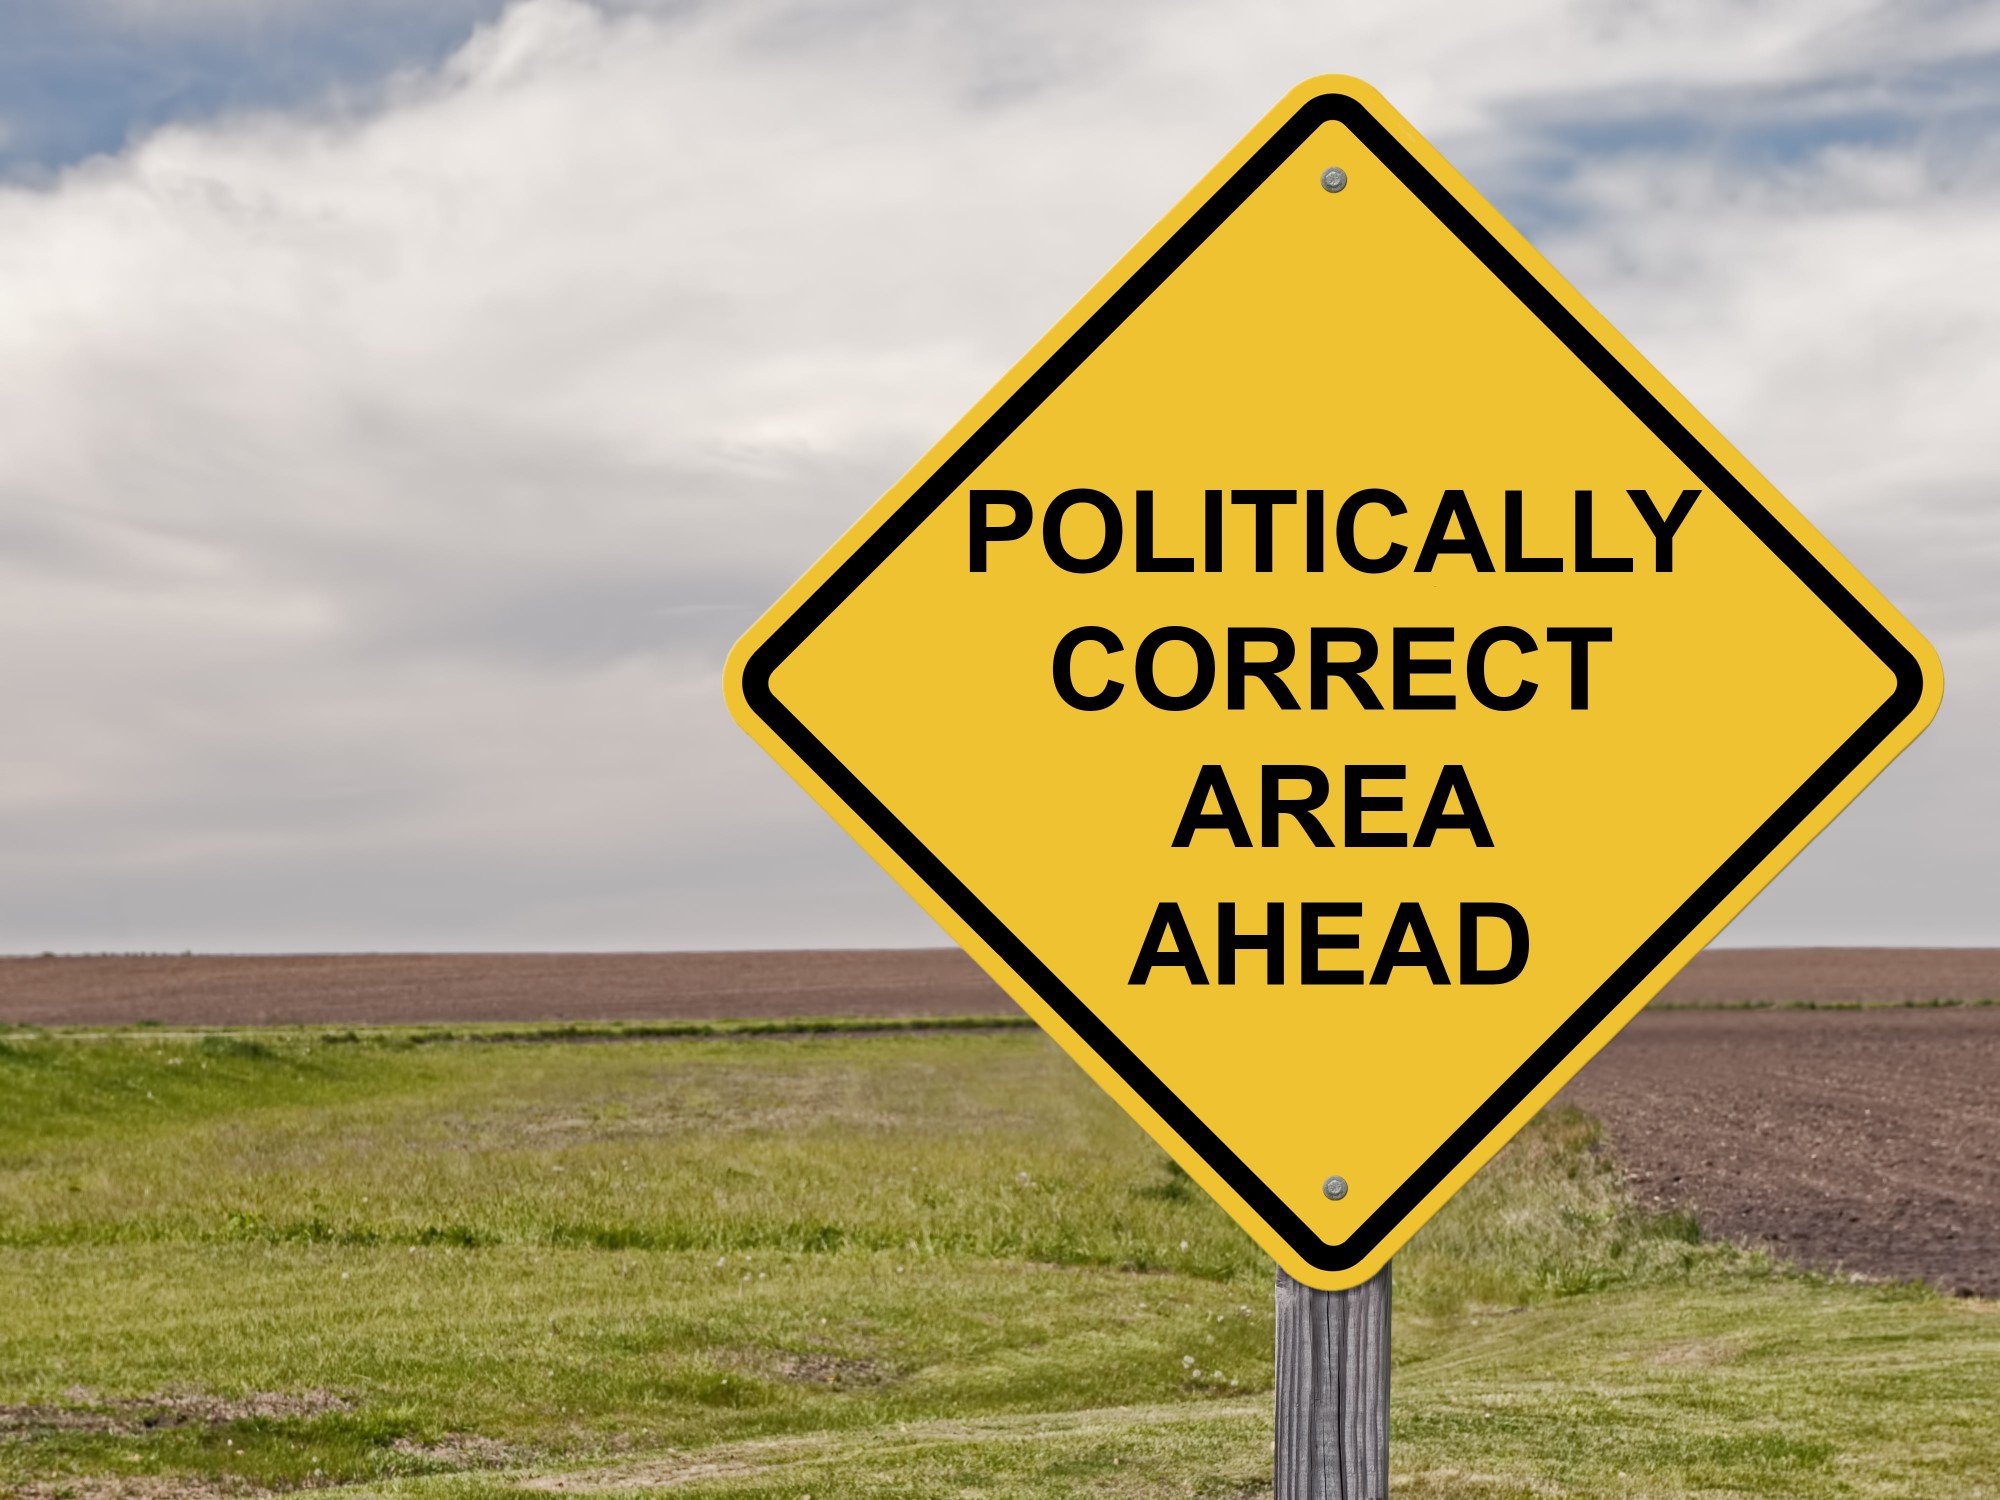 How public relations has changed with political correctness